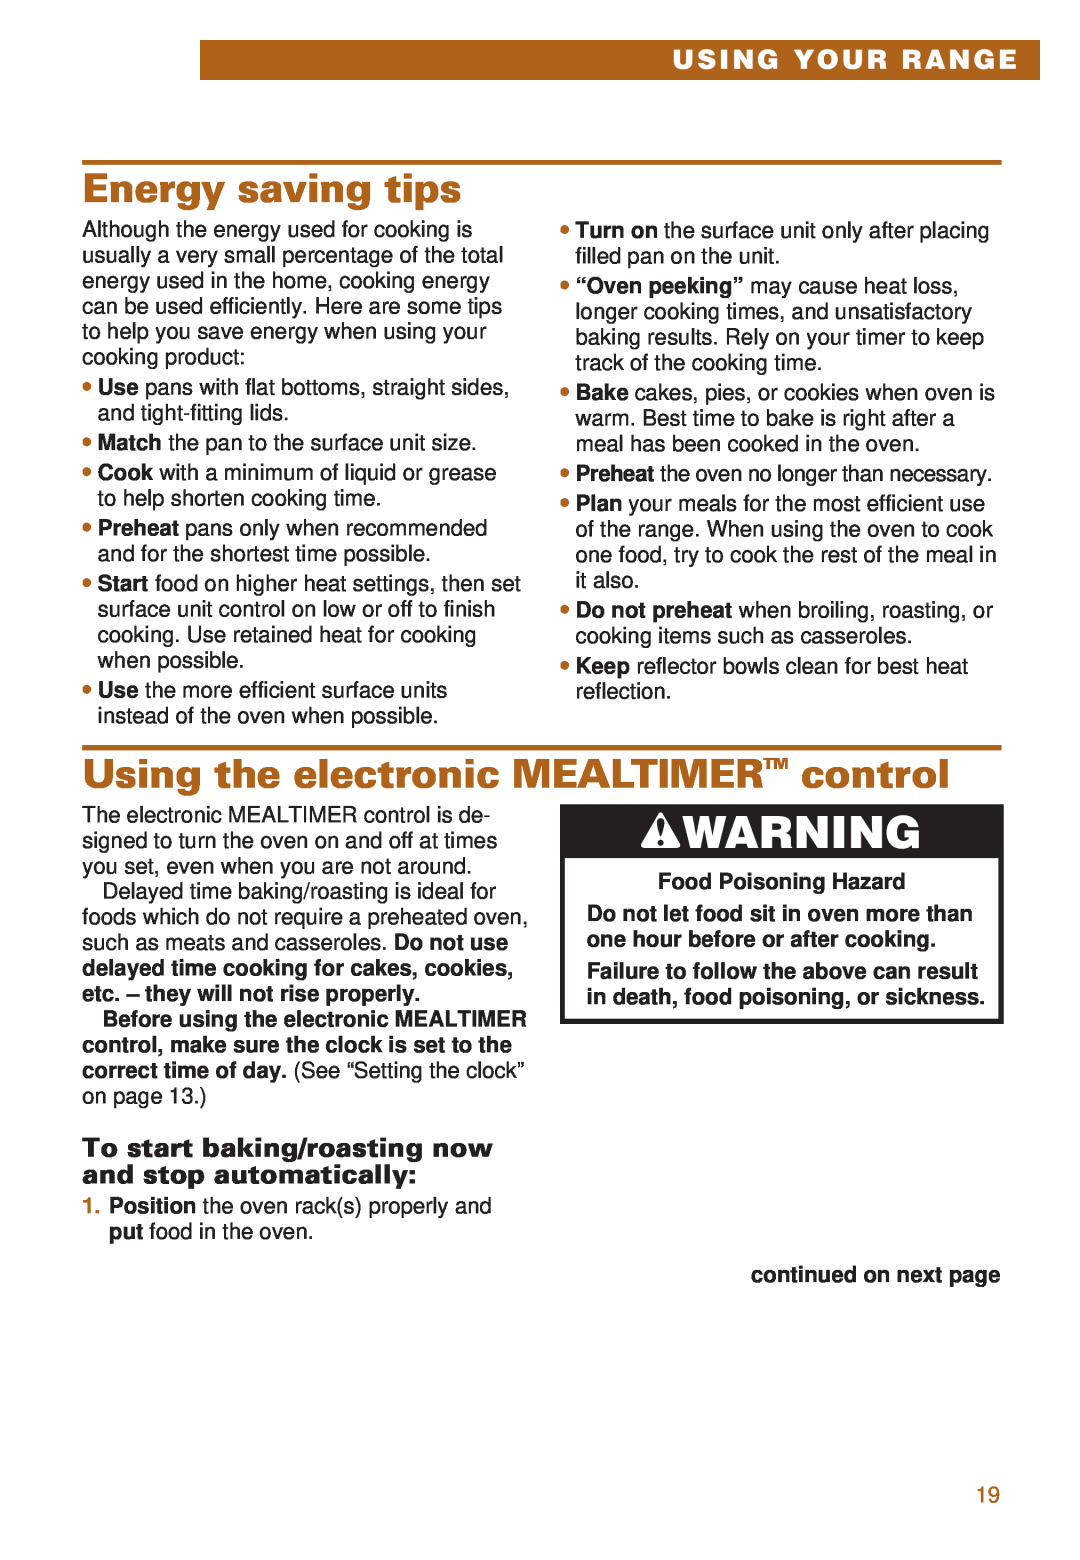 Whirlpool RS385PCE, RS385PXE Energy saving tips, Using the electronic MEALTIMERTM control, wWARNING, Using Your Range 